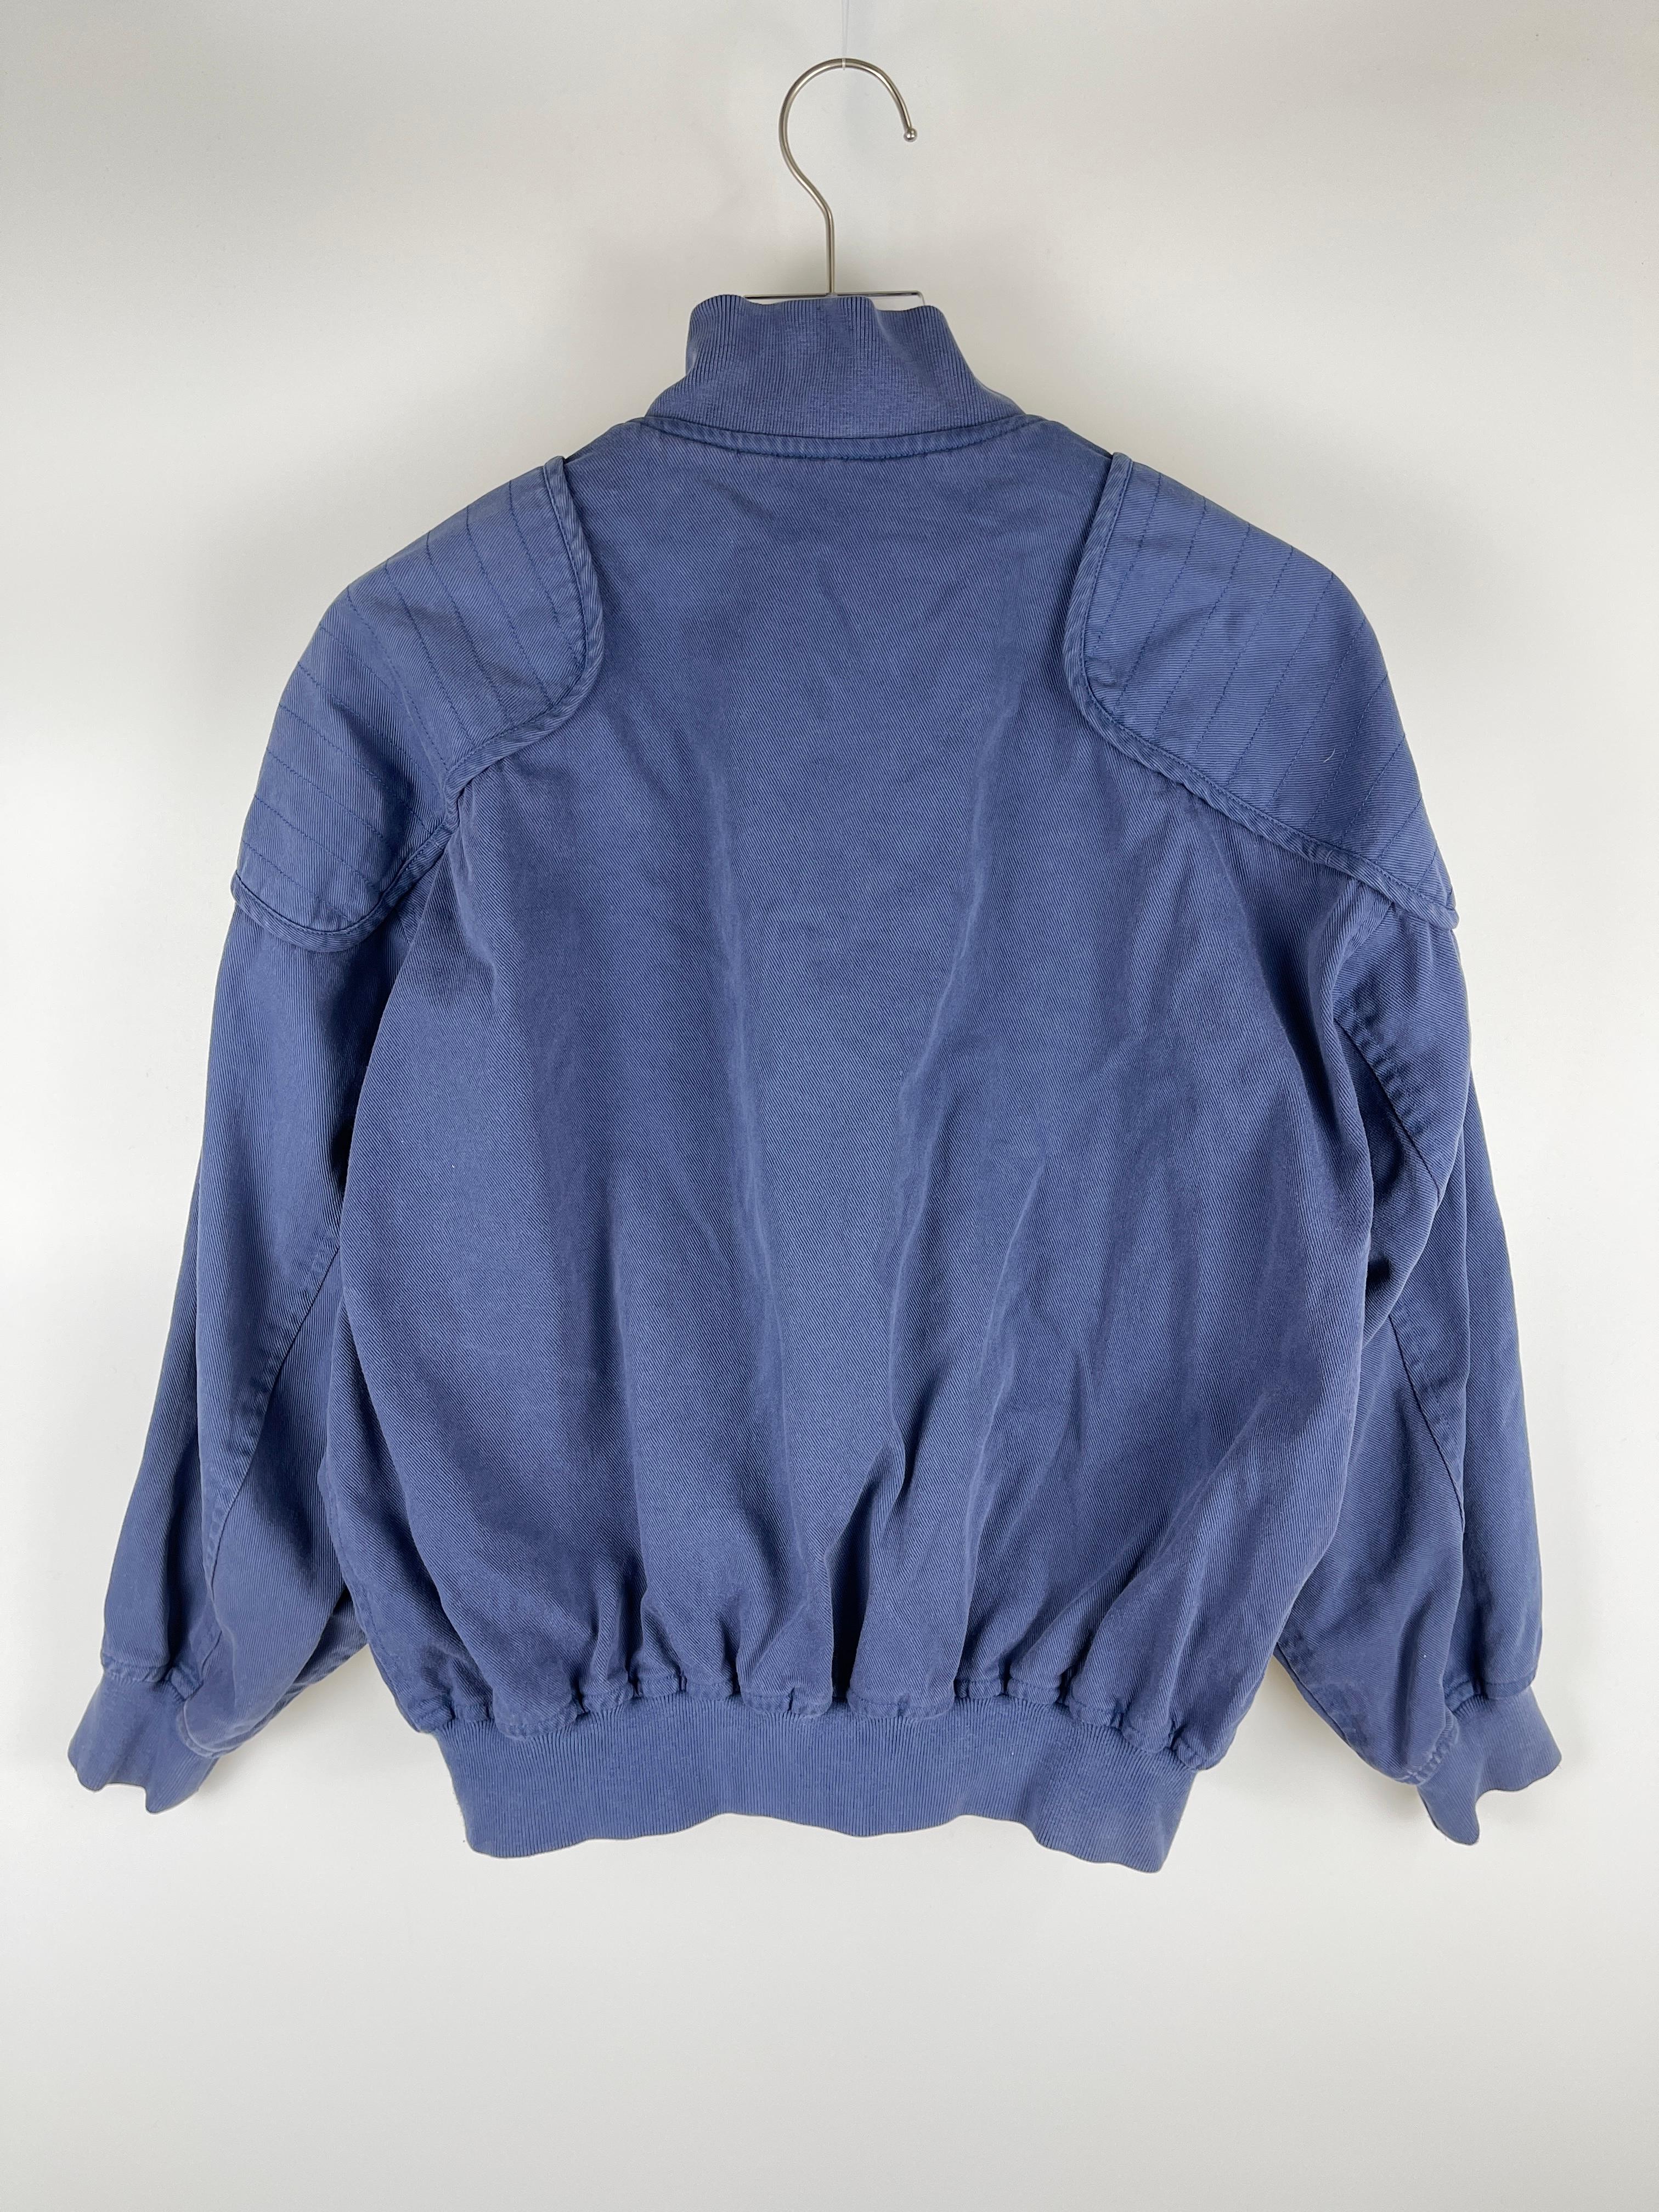 Issey Miyake 1980's Shoulder Pad Bomber Jacket In Good Condition For Sale In Tương Mai Ward, Hoang Mai District